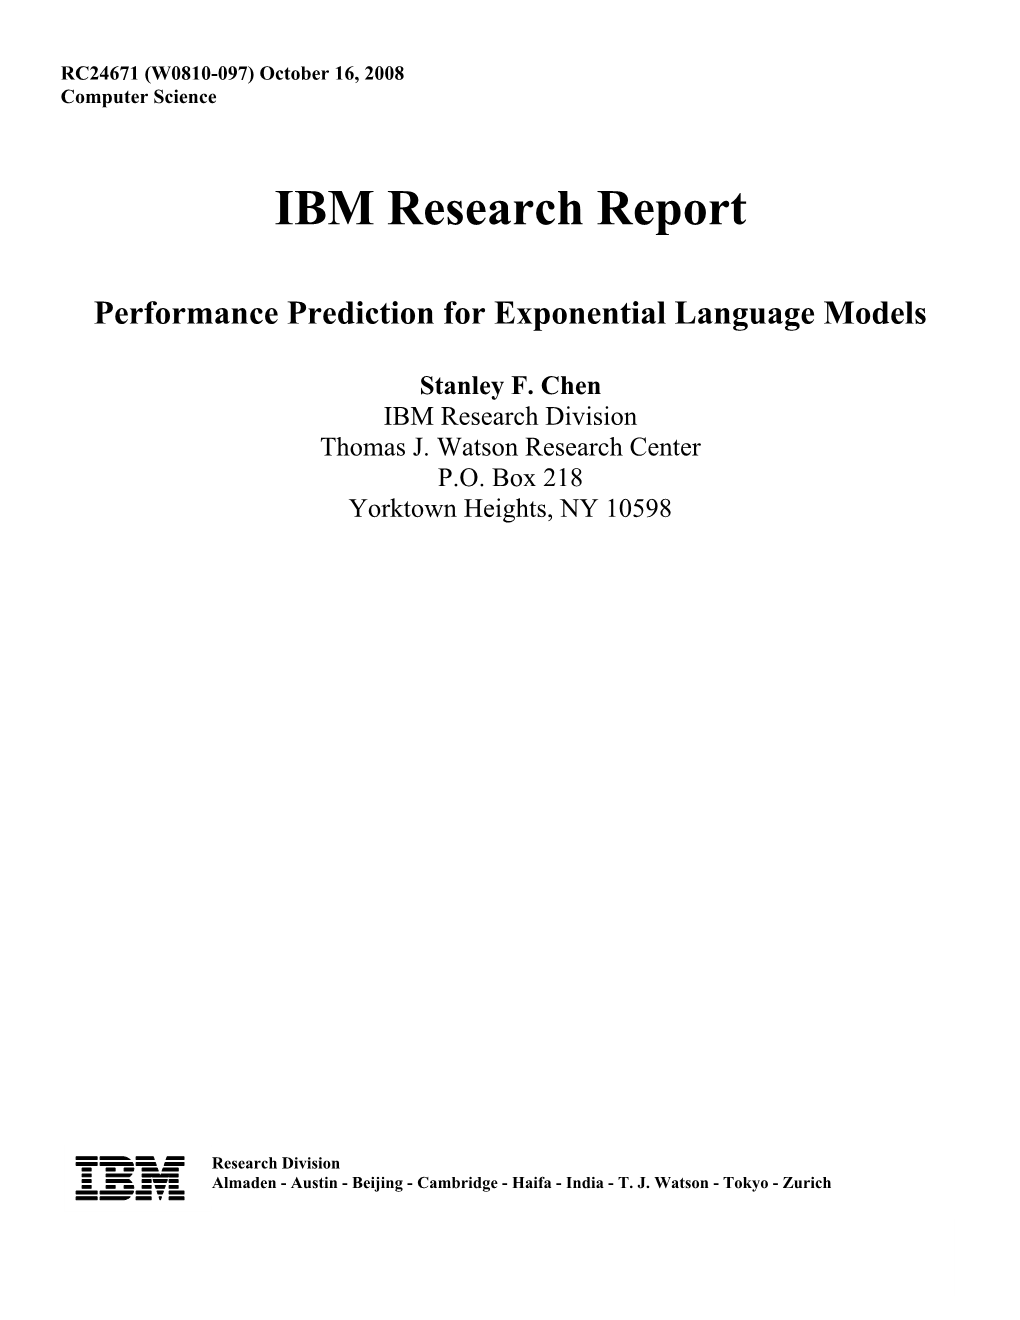 IBM Research Report Performance Prediction for Exponential